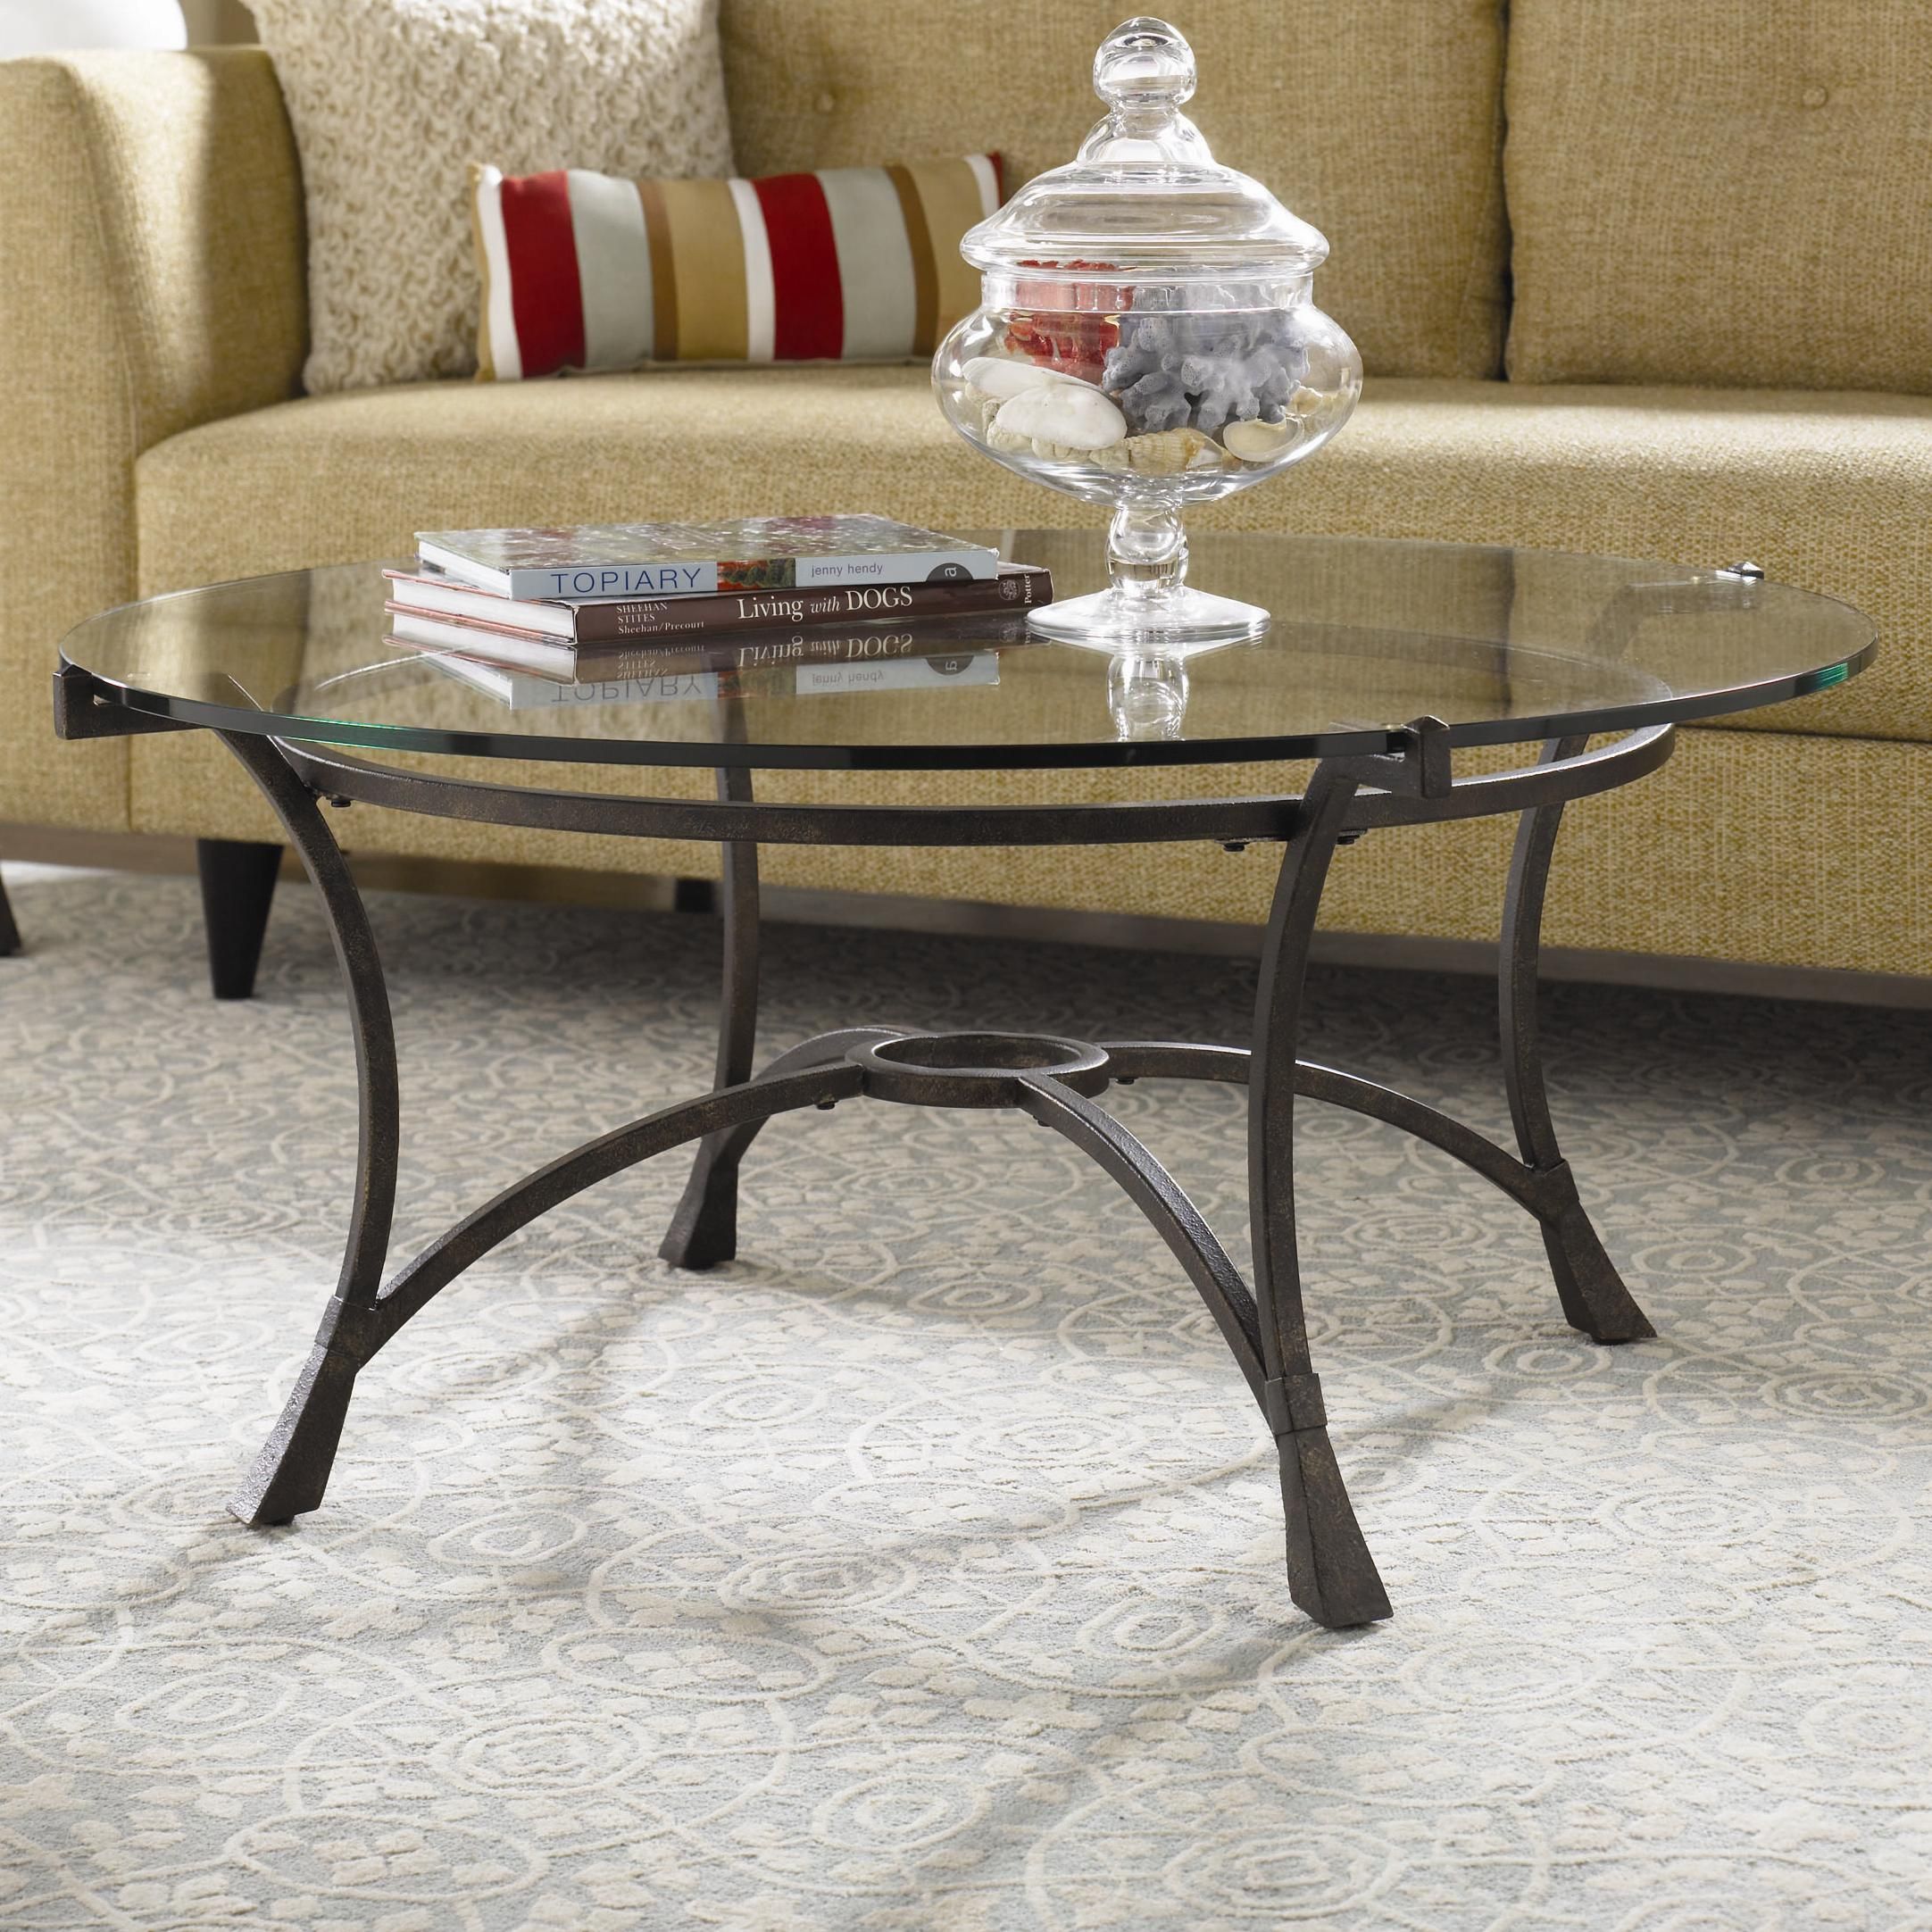 14+ Coffee Table Small Round Unique Small Round Coffee Tables | Images With Round Coffee Tables With Steel Frames (View 20 of 21)